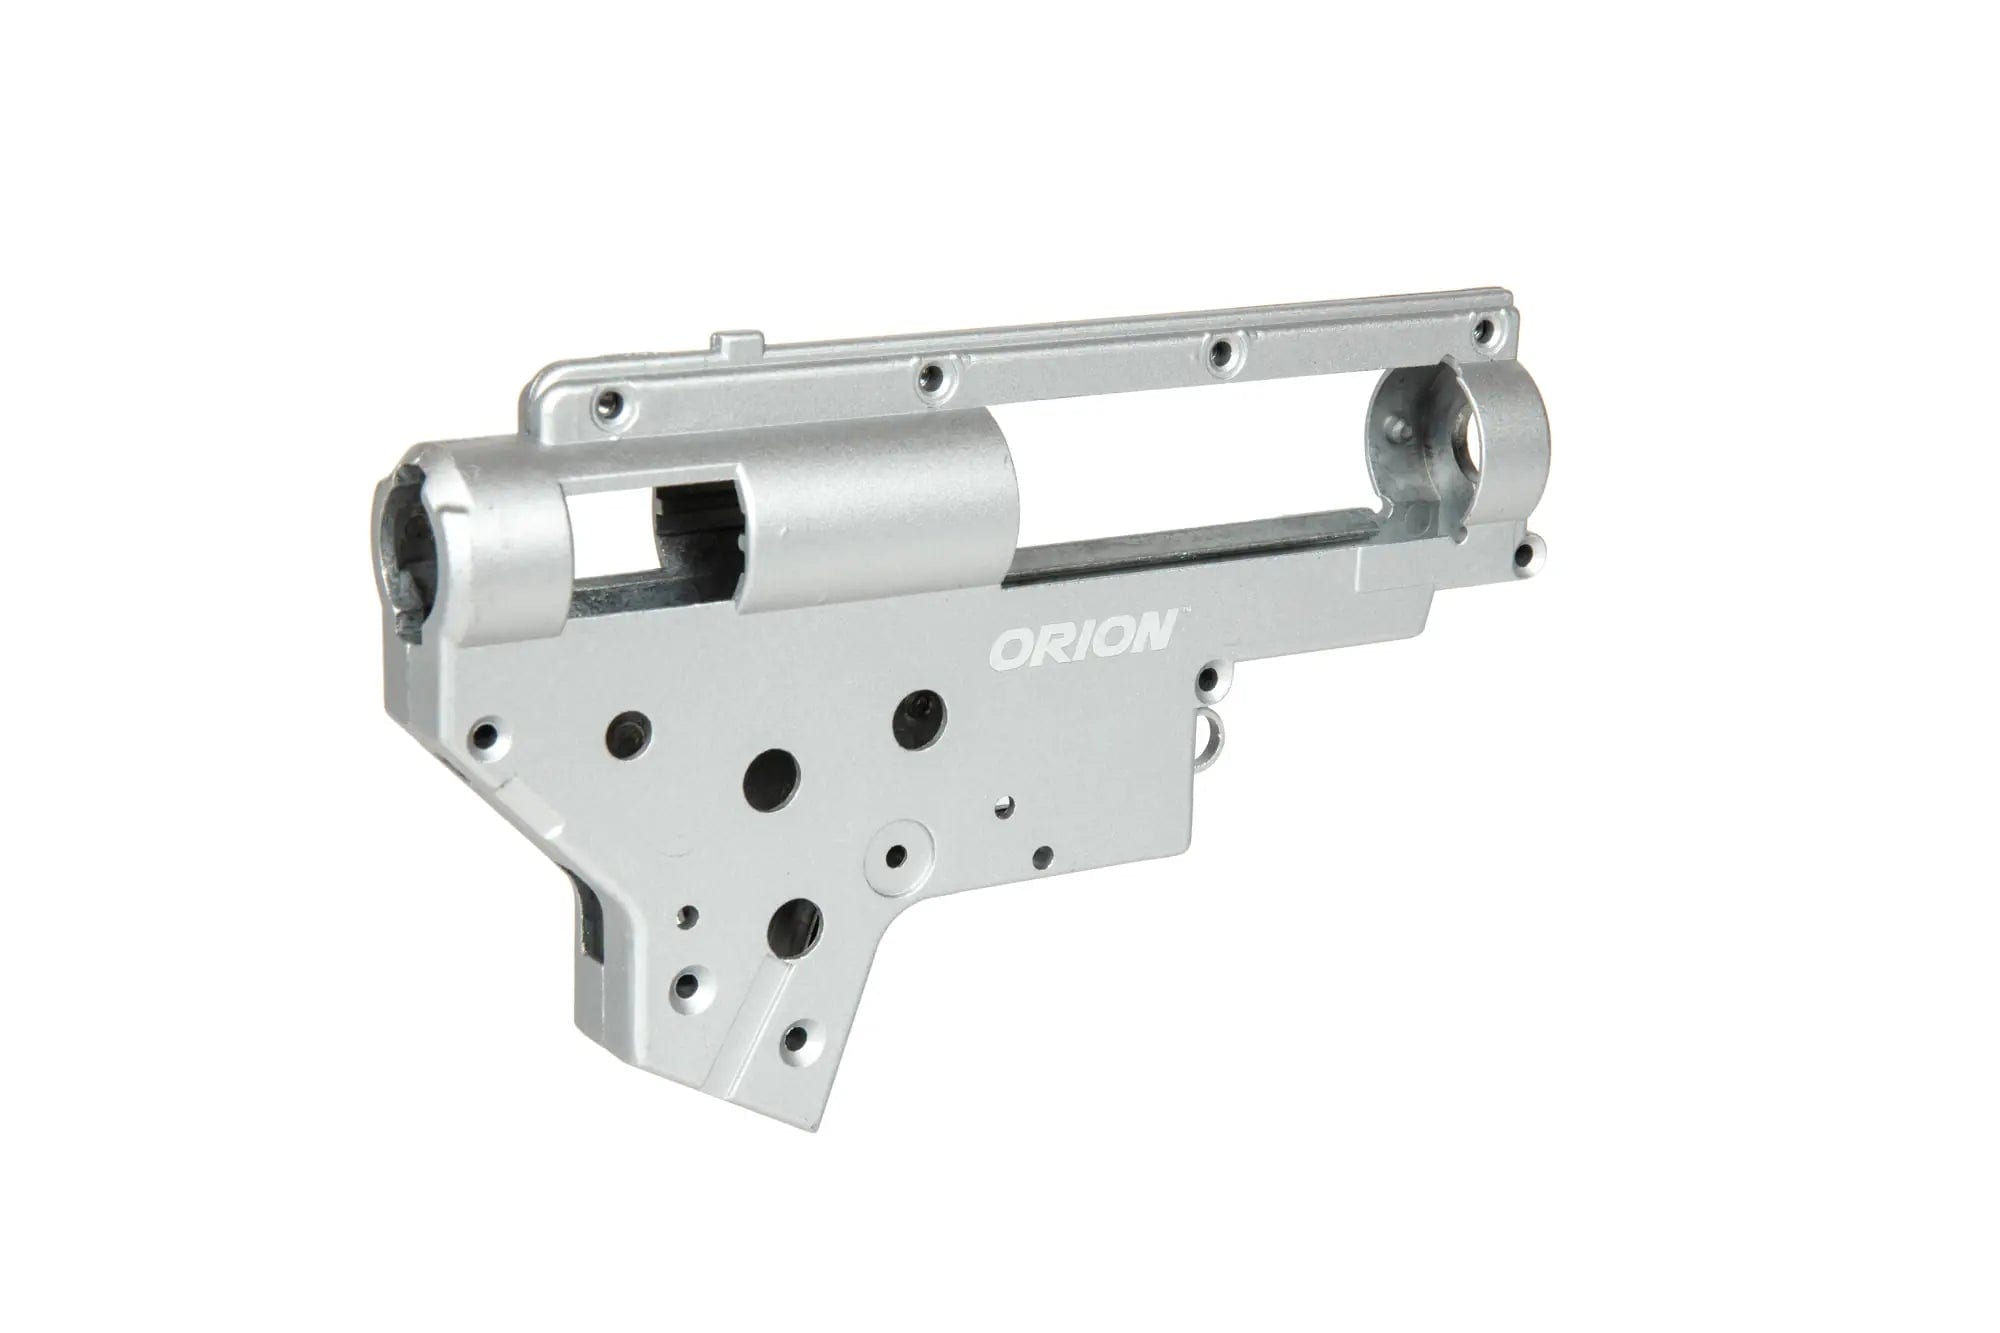 ORION V2 Gearbox Shell for M4 Specna Arms EDGE (no bearing)